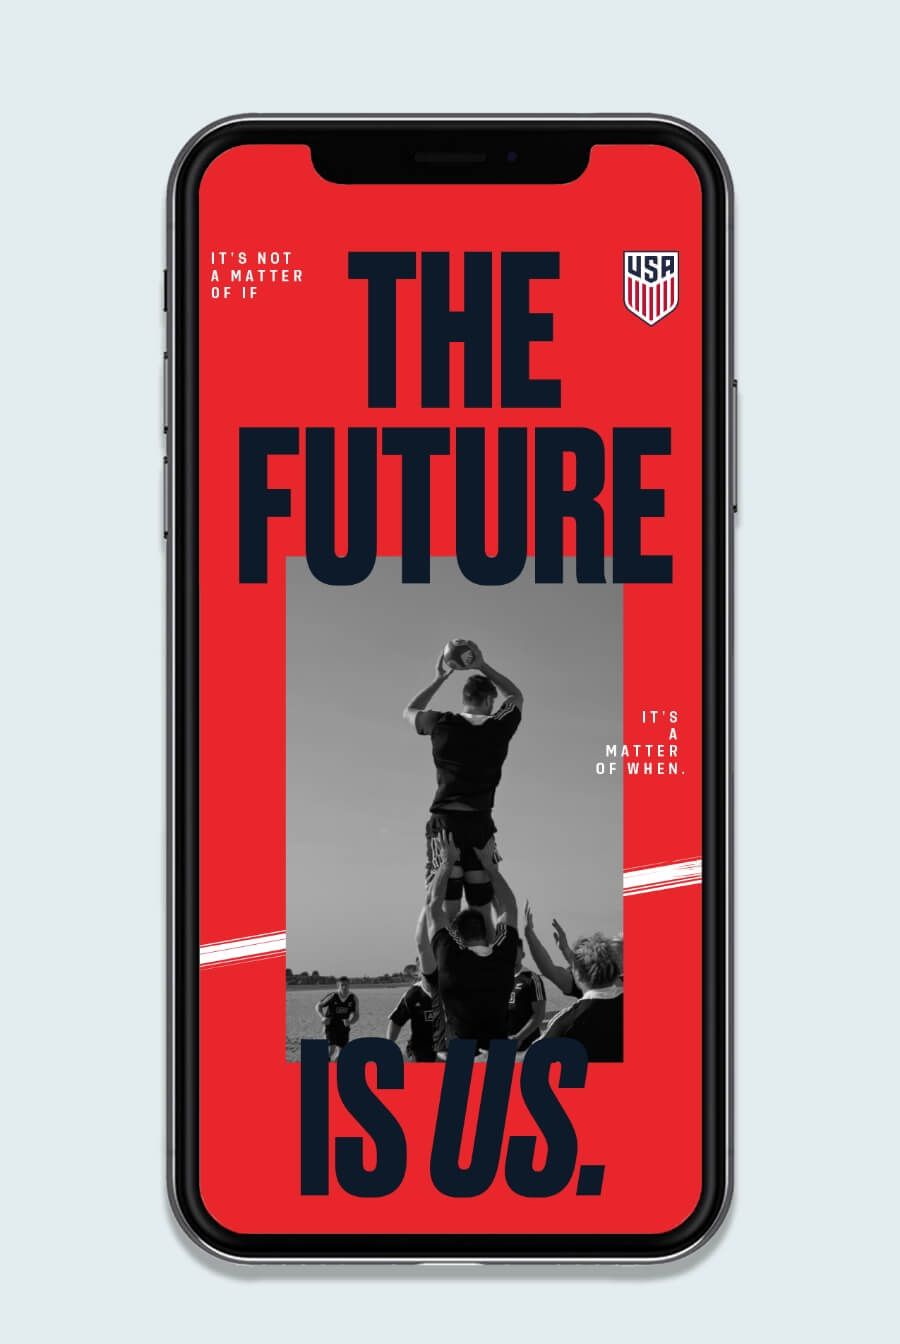 Phone screen instagram story. The future is us.